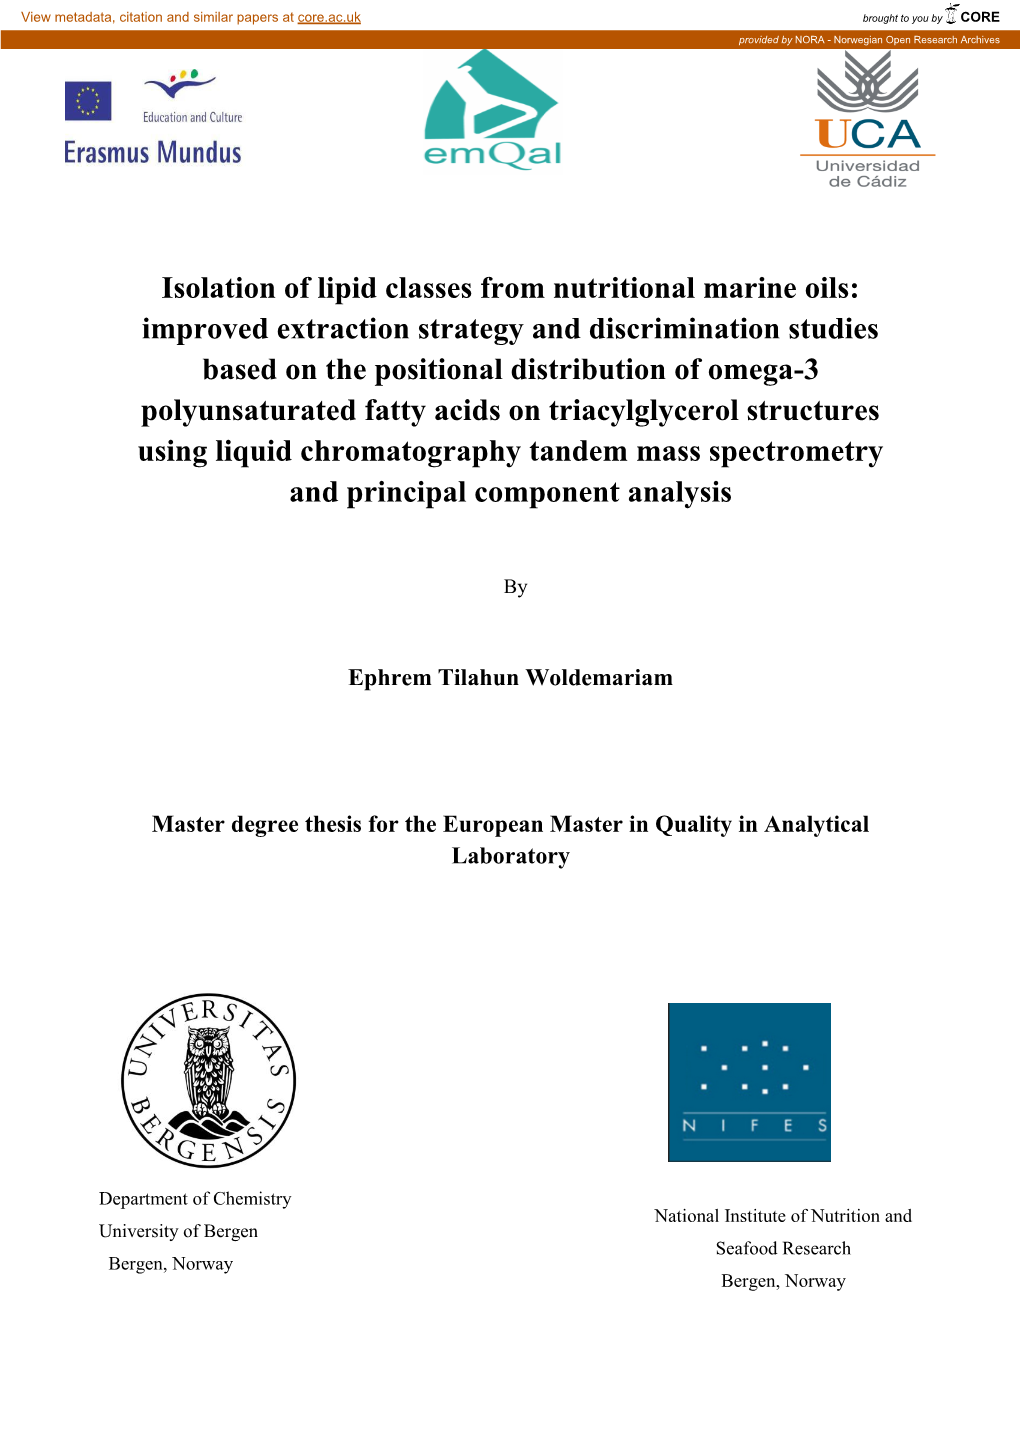 Isolation of Lipid Classes from Nutritional Marine Oils: Improved Extraction Strategy and Discrimination Studies Based on the Po